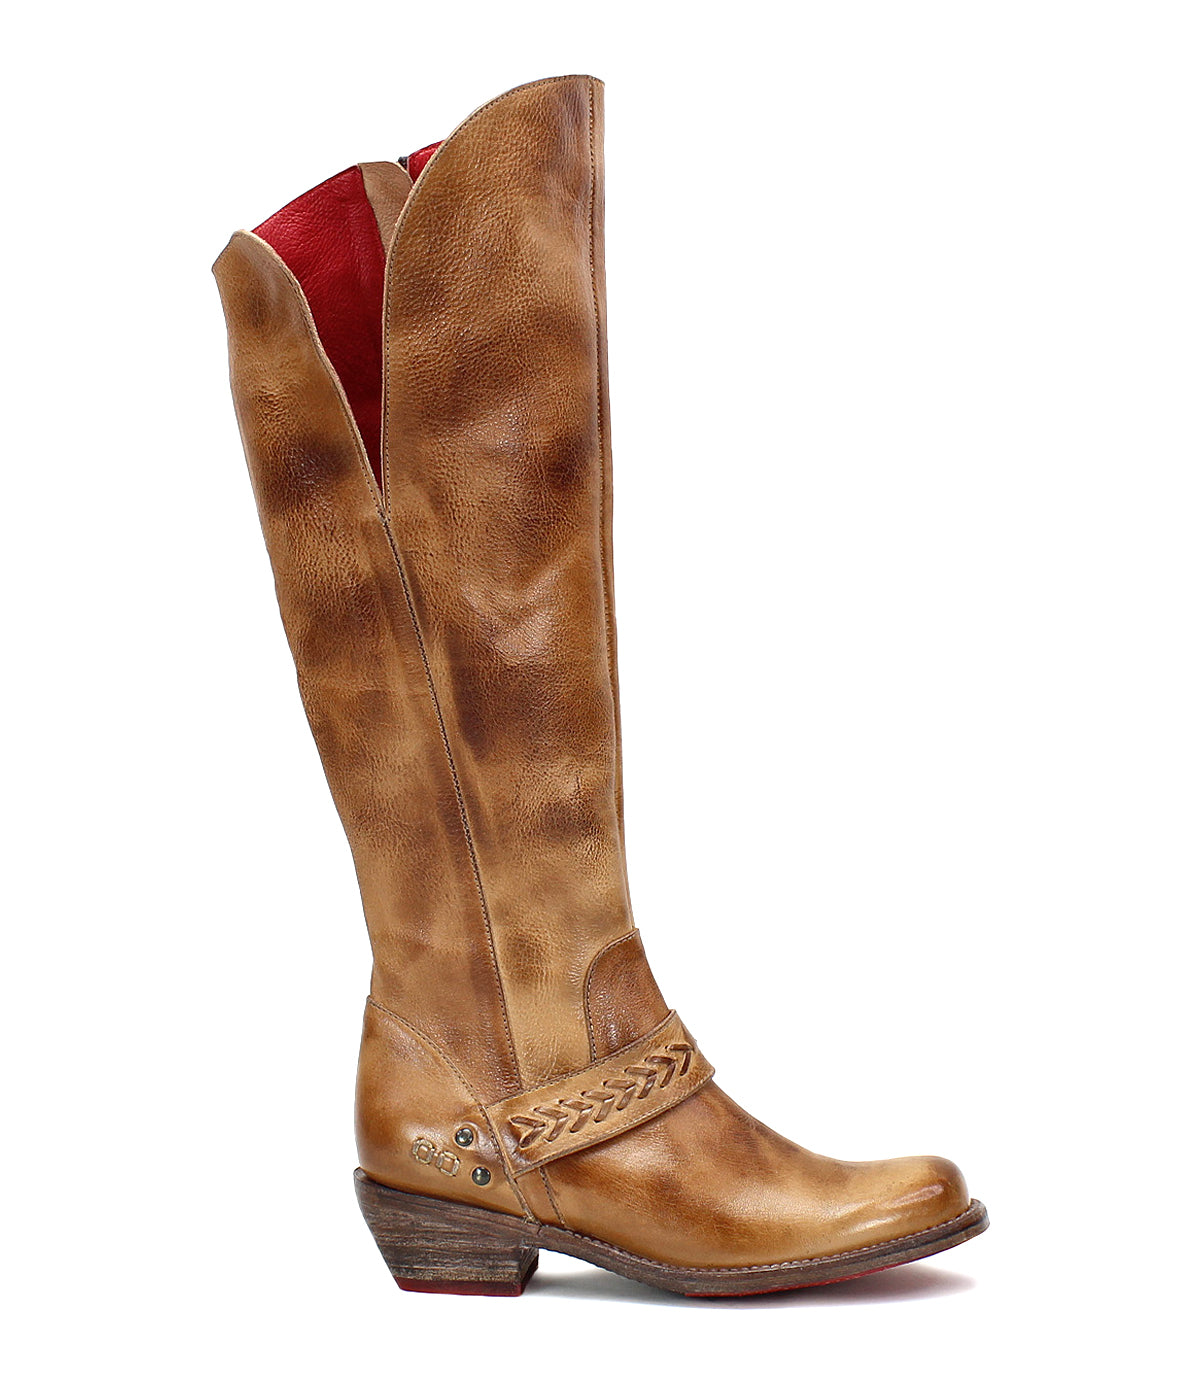 A women's Bed Stu Tan Cowboy Boot with a red sole.